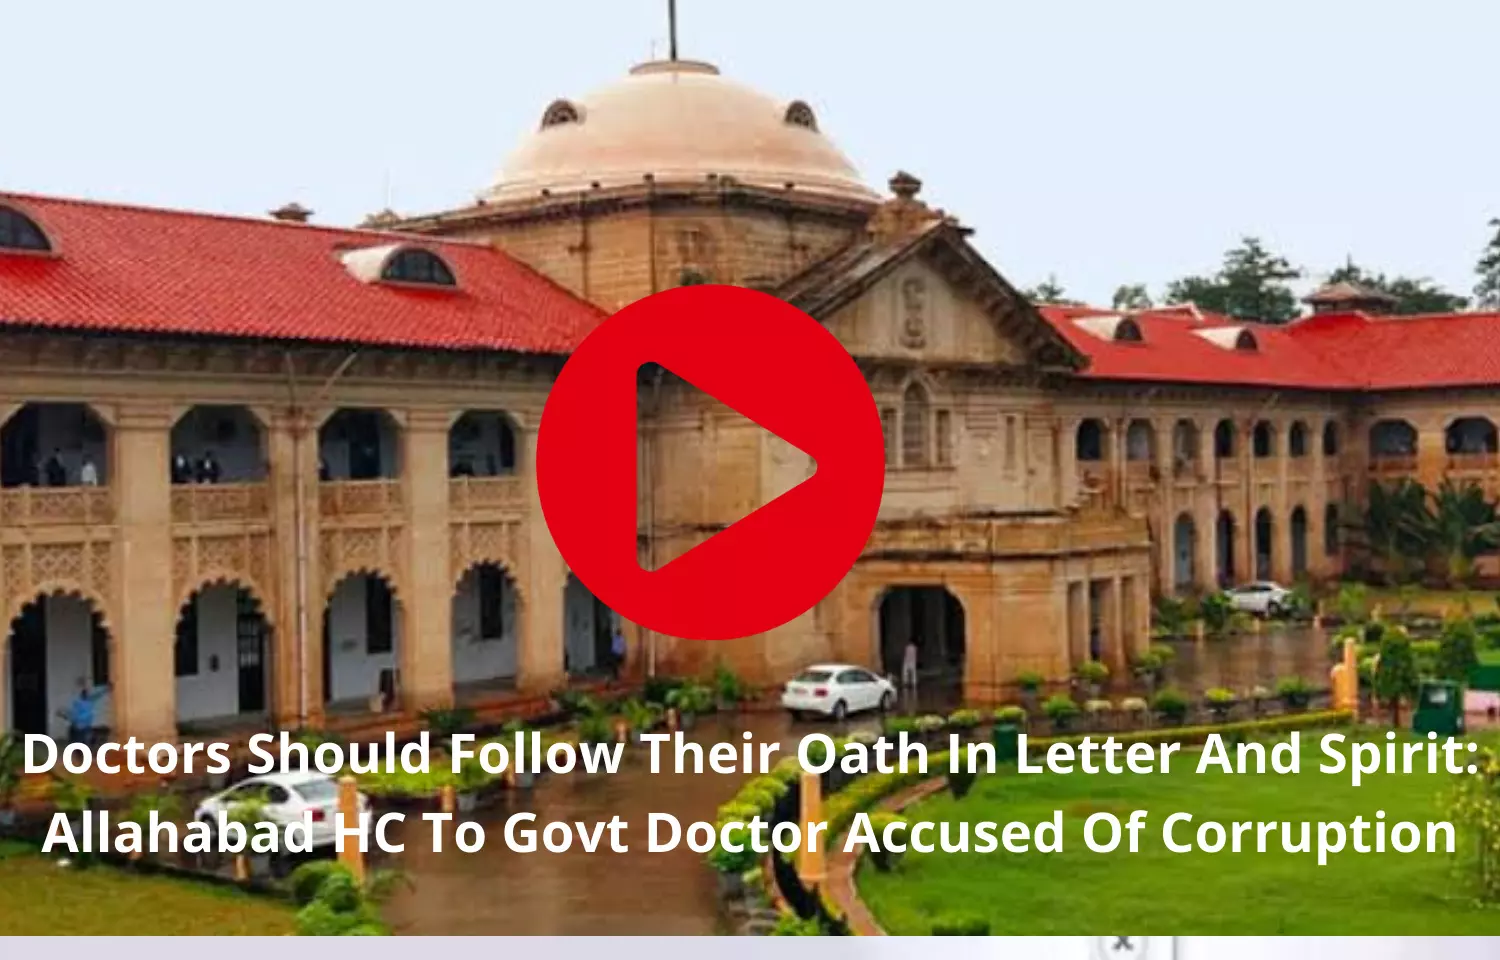 Doctors Should Follow Their Oath In Letter And Spirit: Allahabad HC To Govt Doctor Accused Of Corruption